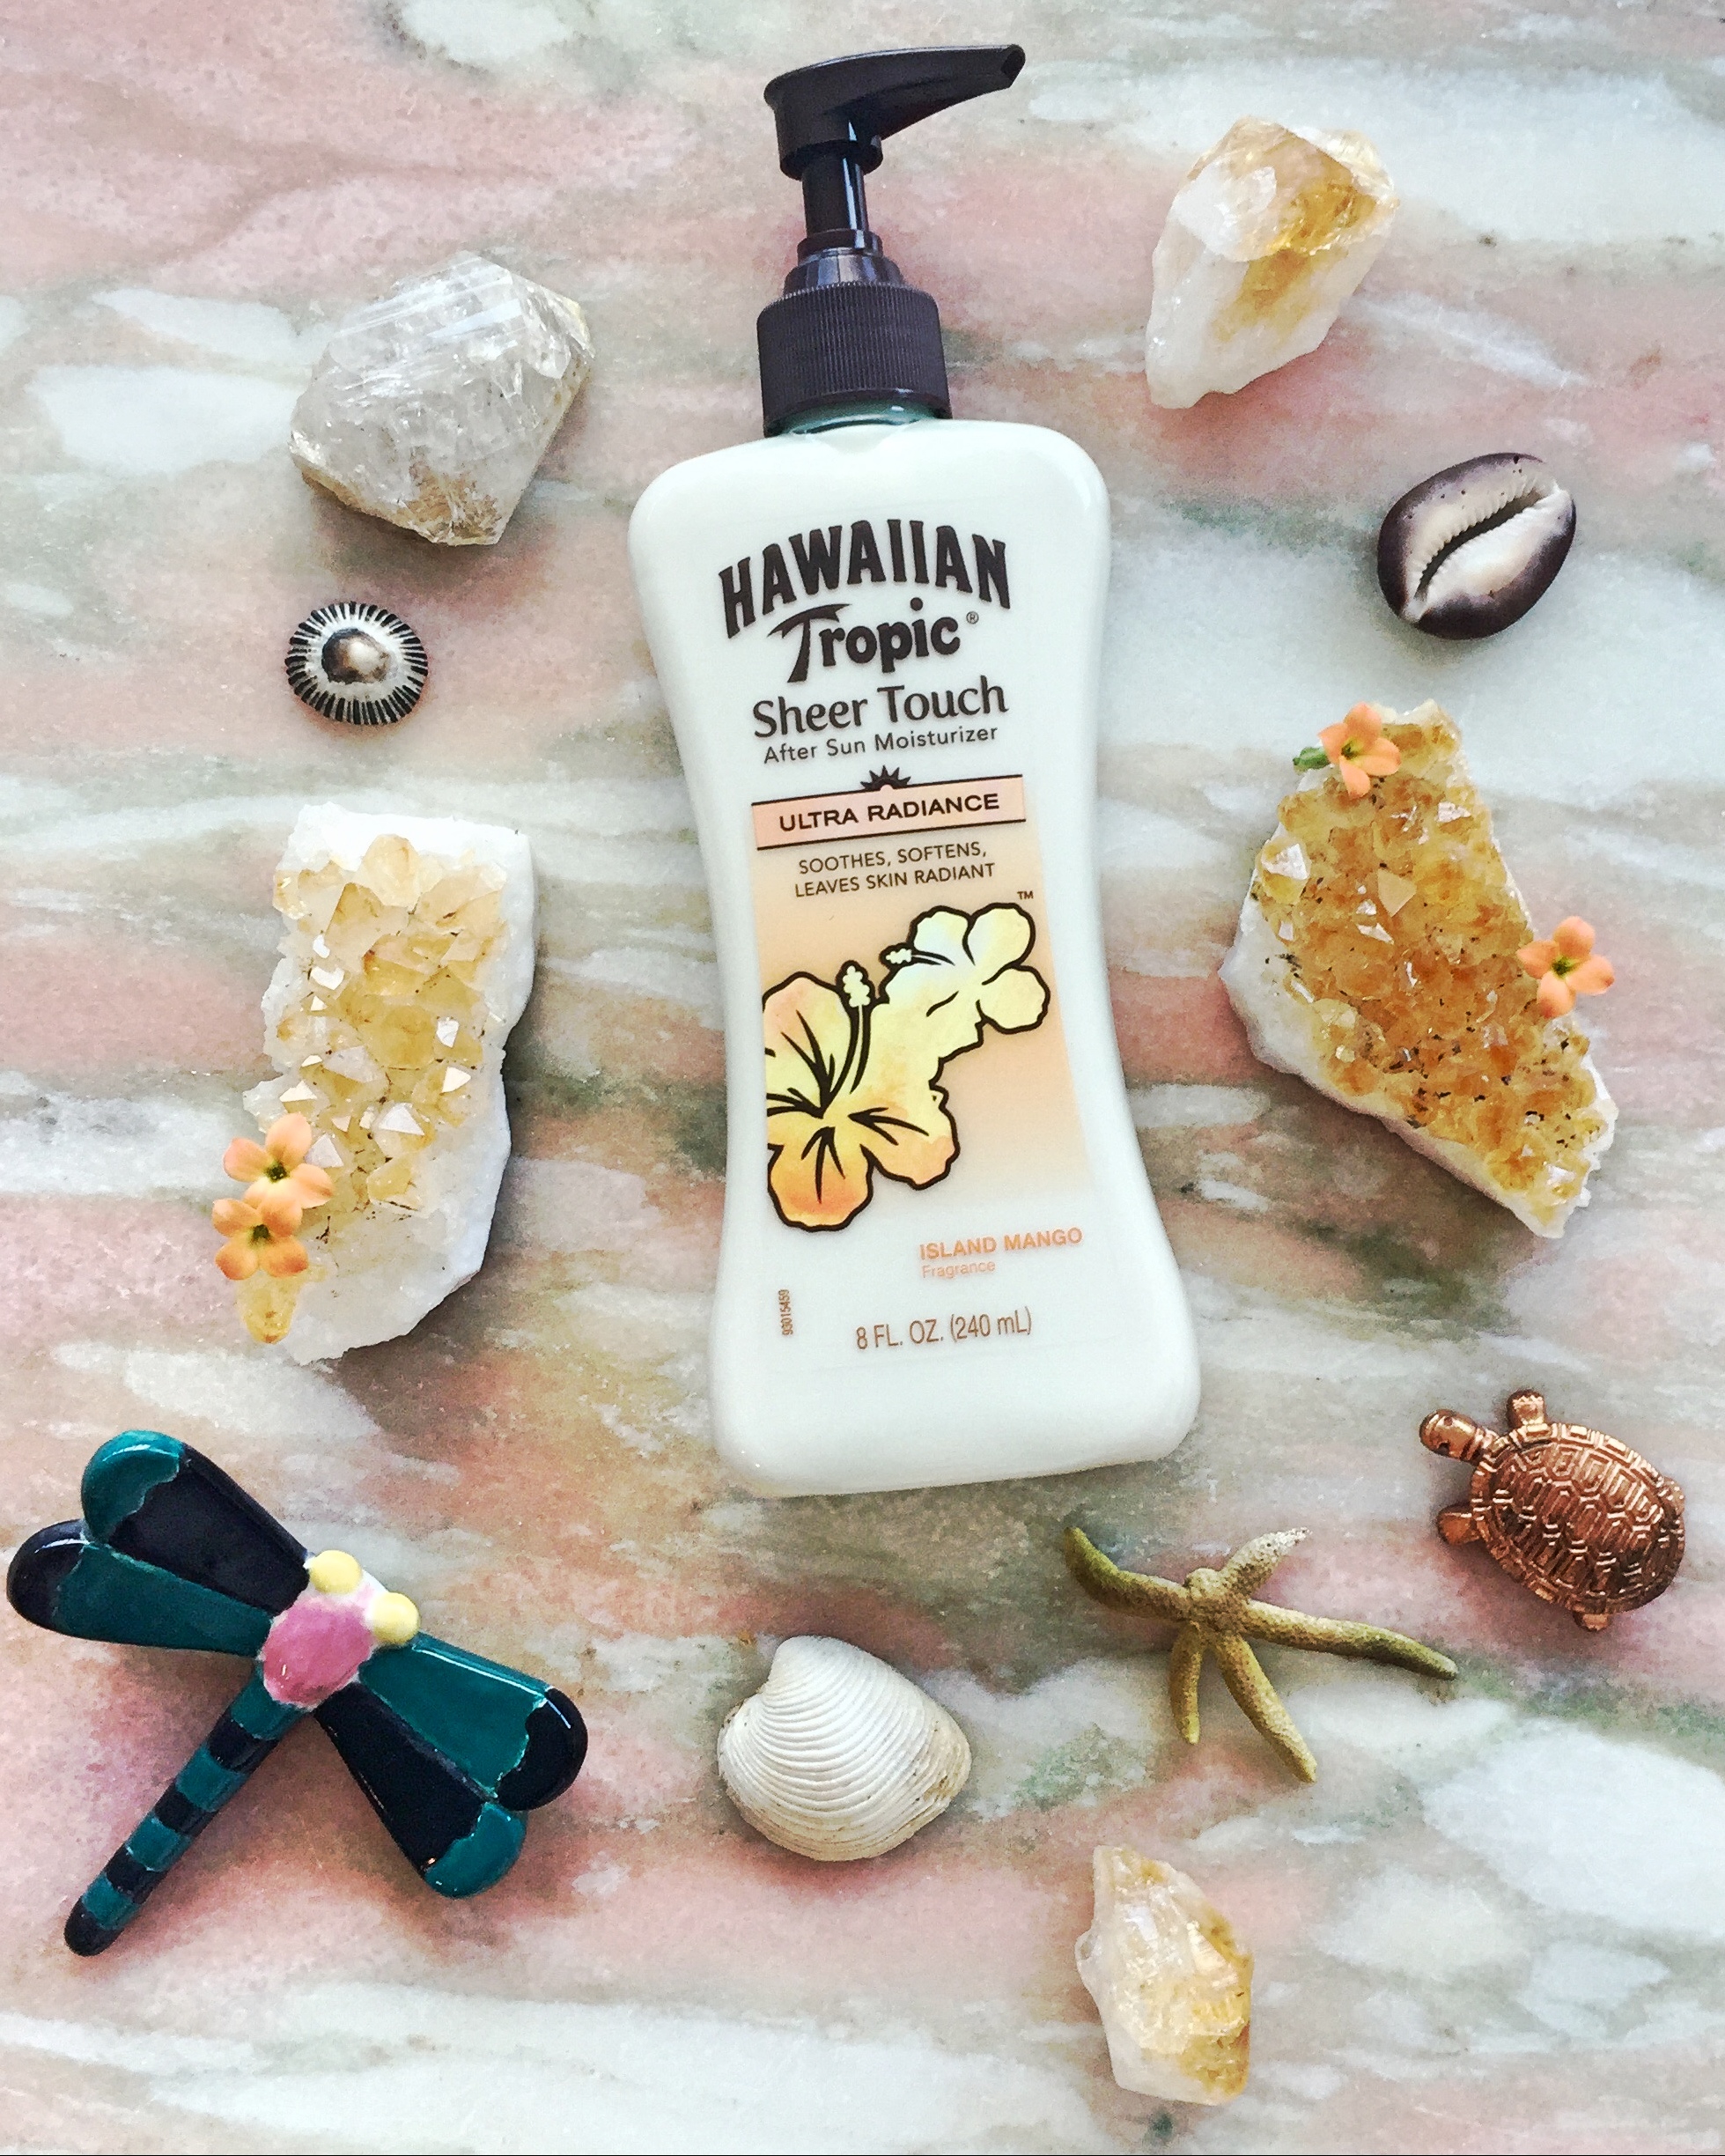 Hawaiian Tropic Sheer Touch Ultra Radiance After Sun Moisturizer contains an innovative formula of shea butter and mango extract to leave skin feeling pampered and noticeably soft and luminous